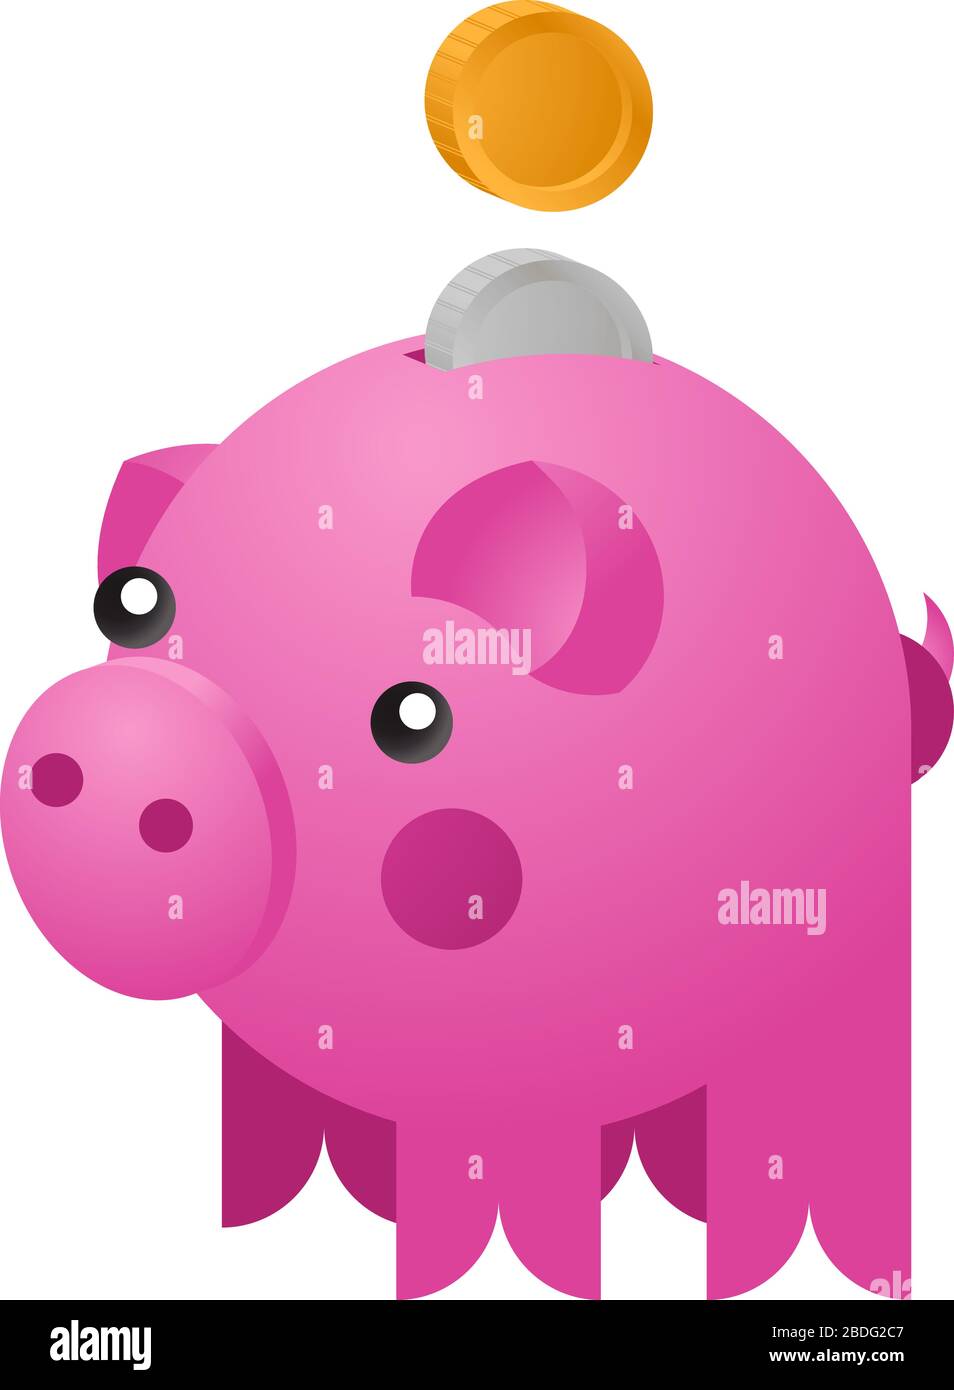 Moneybox in the form of ceramic pig with a coins falling into it. Concept of saving money. Vector illustration Stock Vector